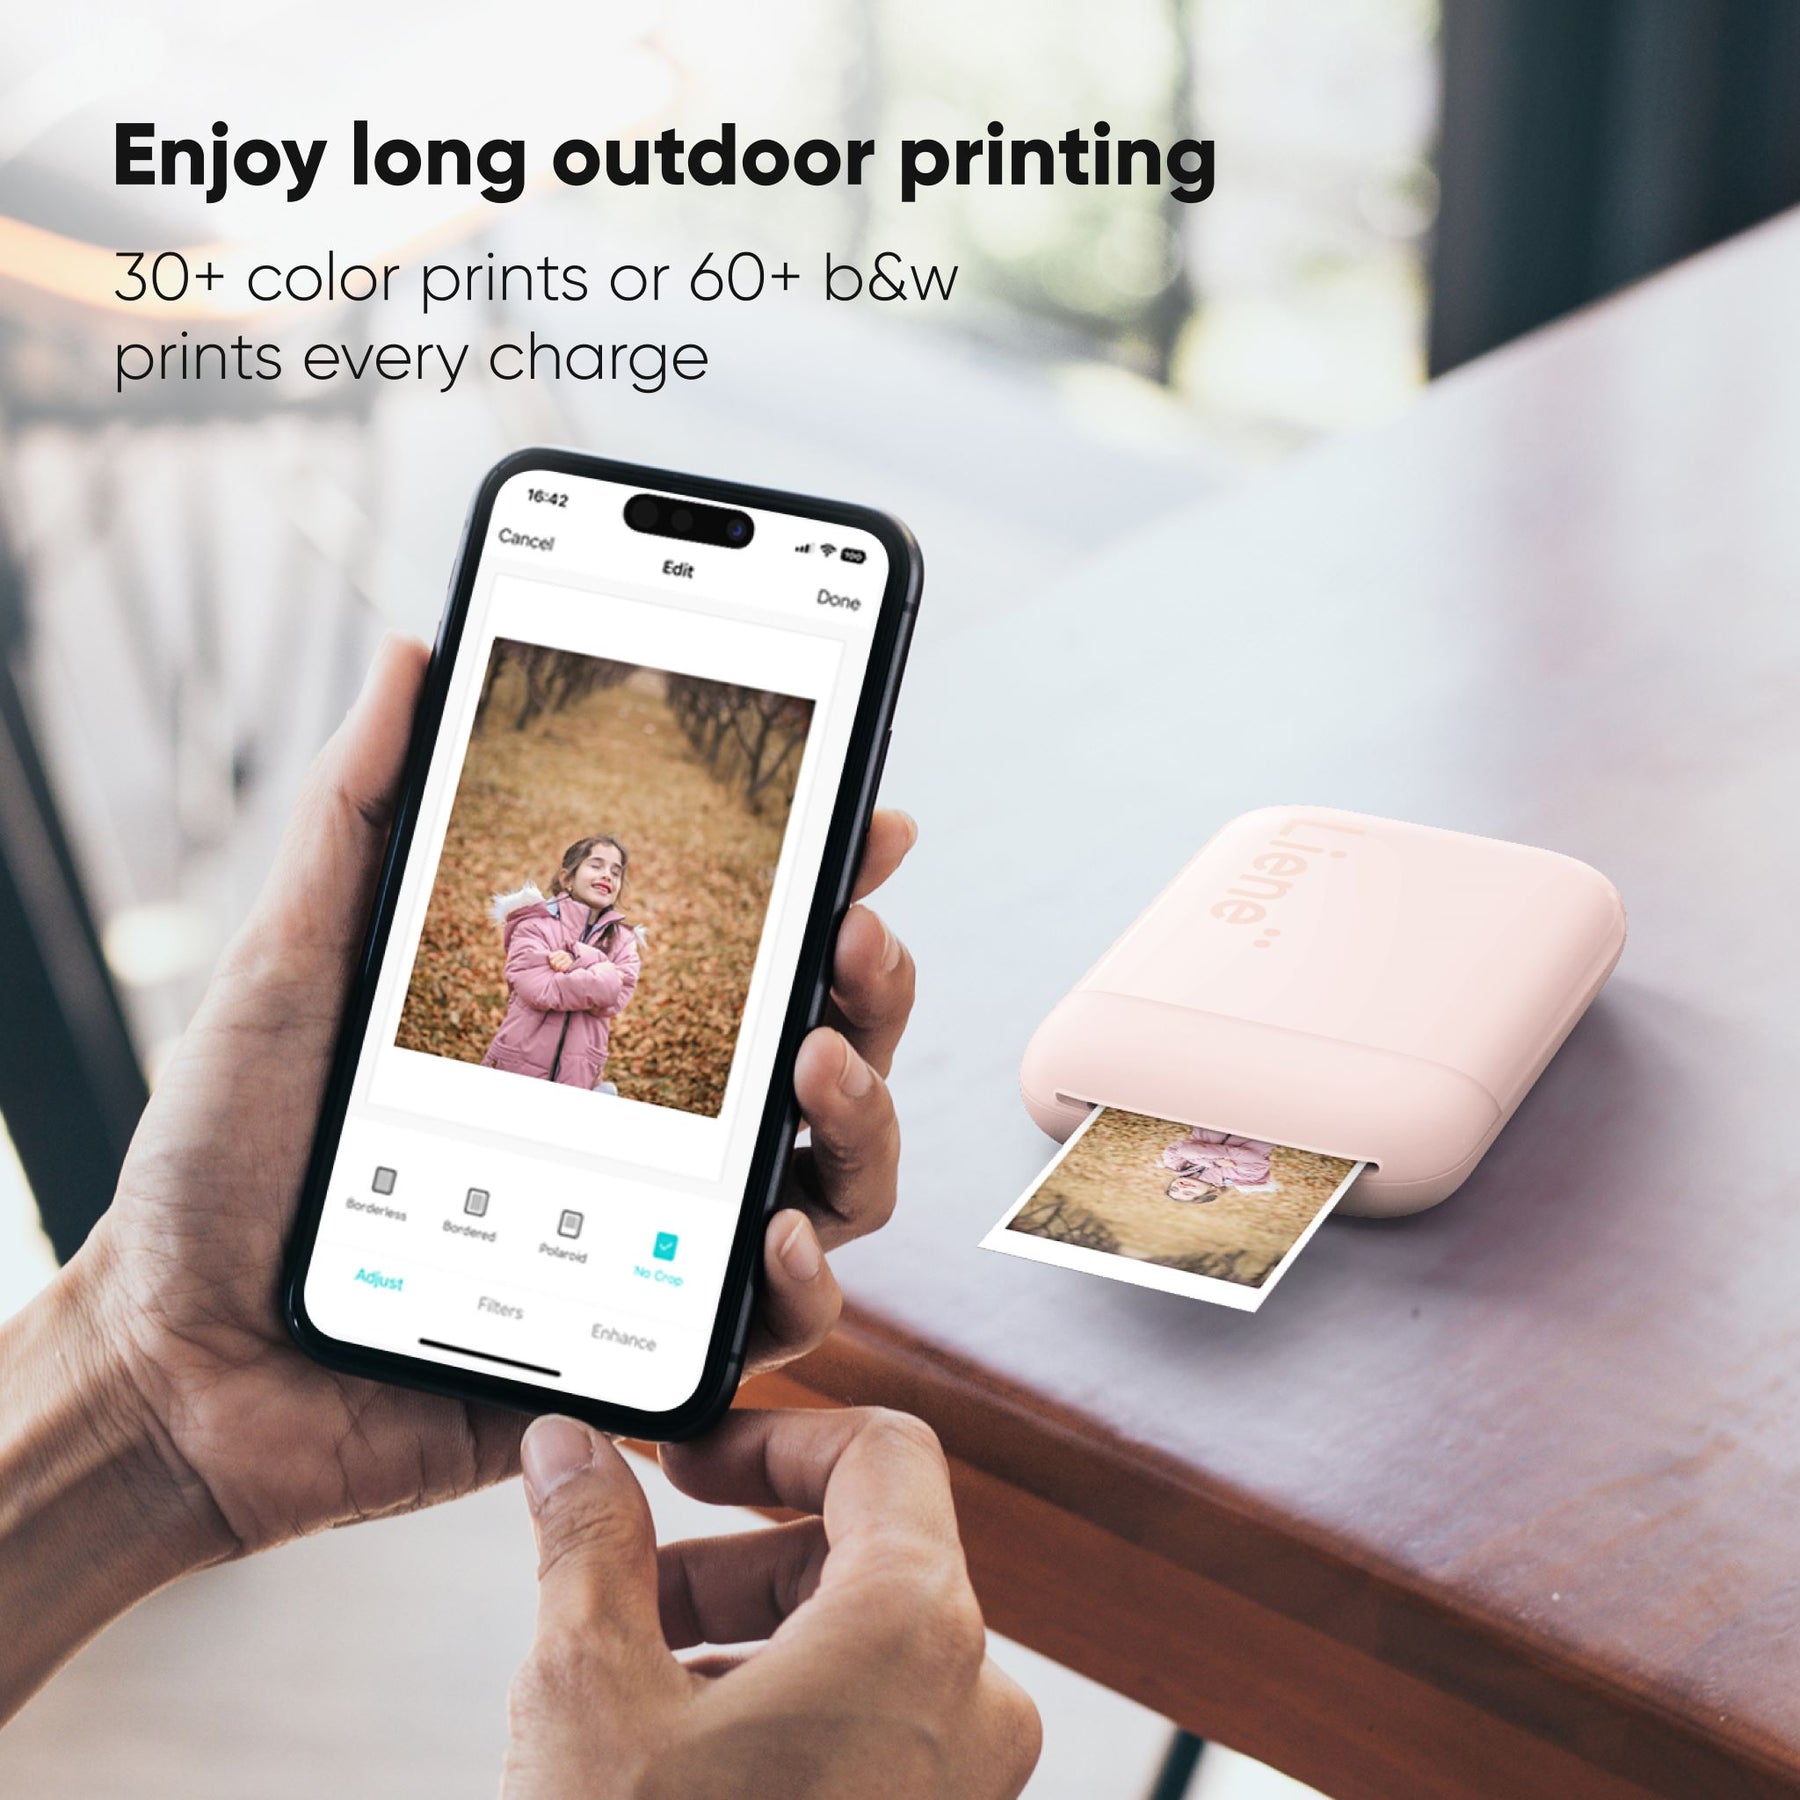 Liene Pearl K100 2x3" Portable Instant Photo Printer - Pink (5 Sheets Zink Photo Paper), Bluetooth Connection, Premium Quality